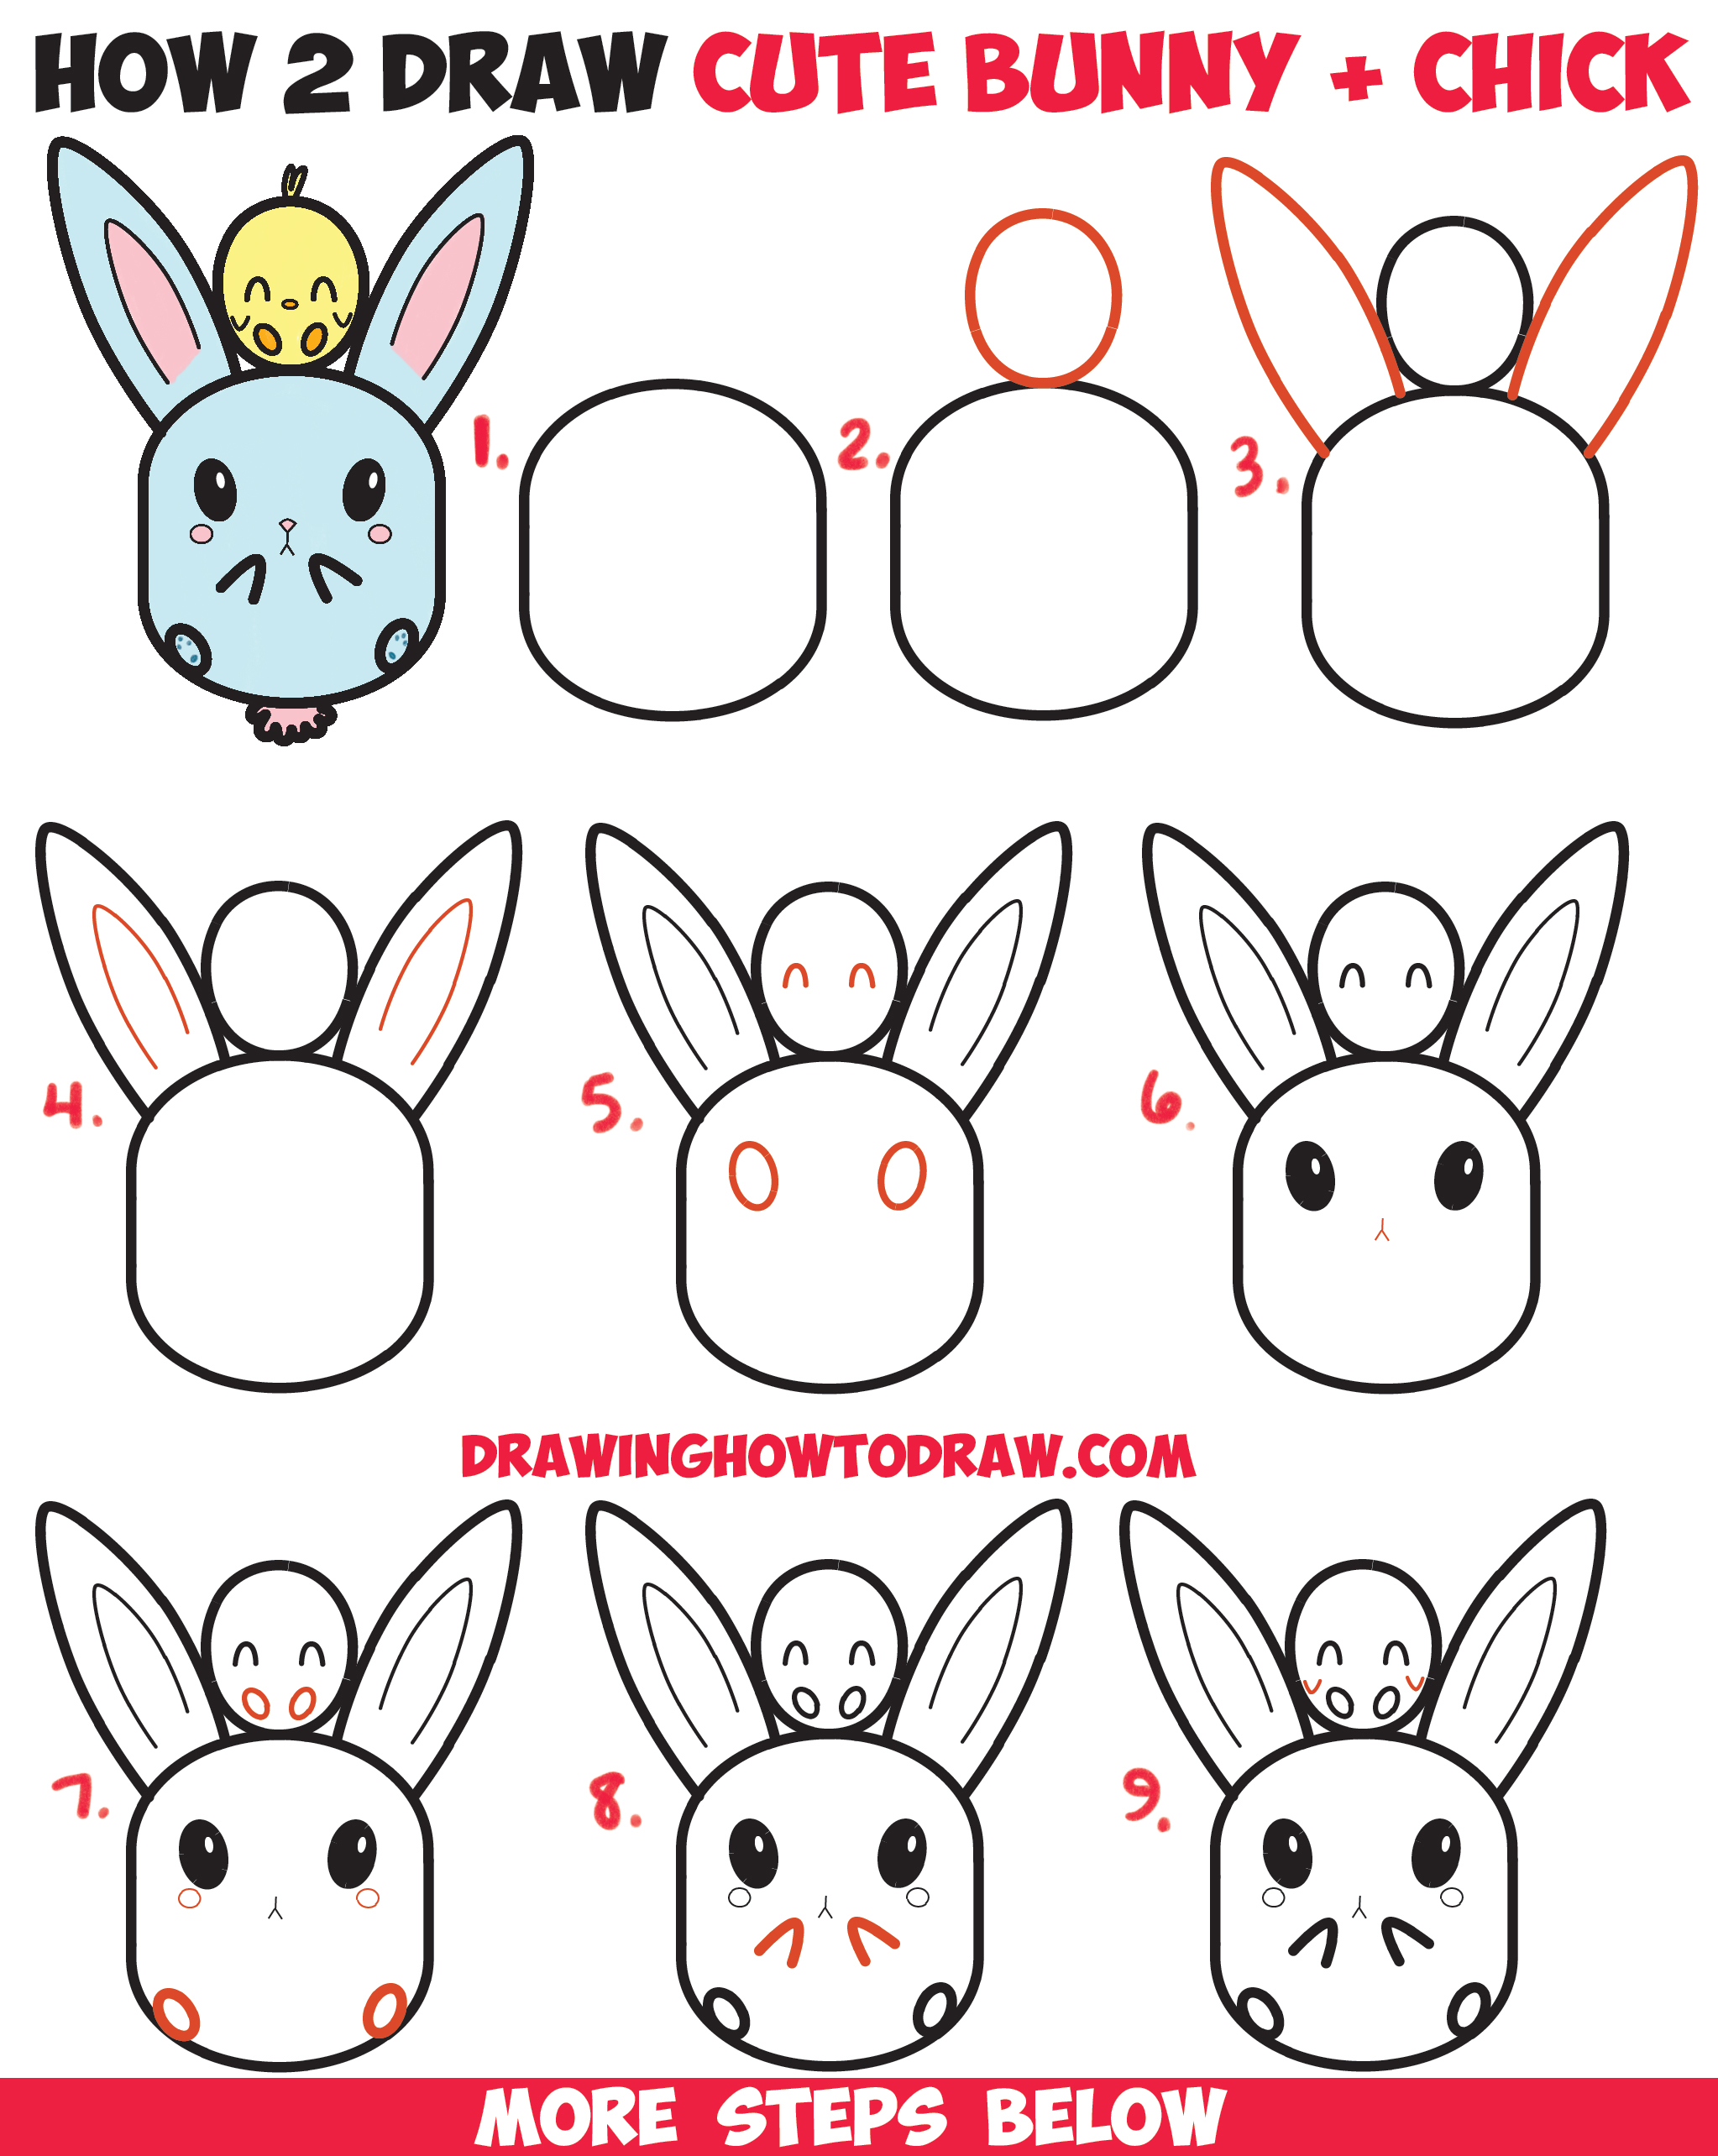 How to Draw the Easter Bunny: An Easy Guide